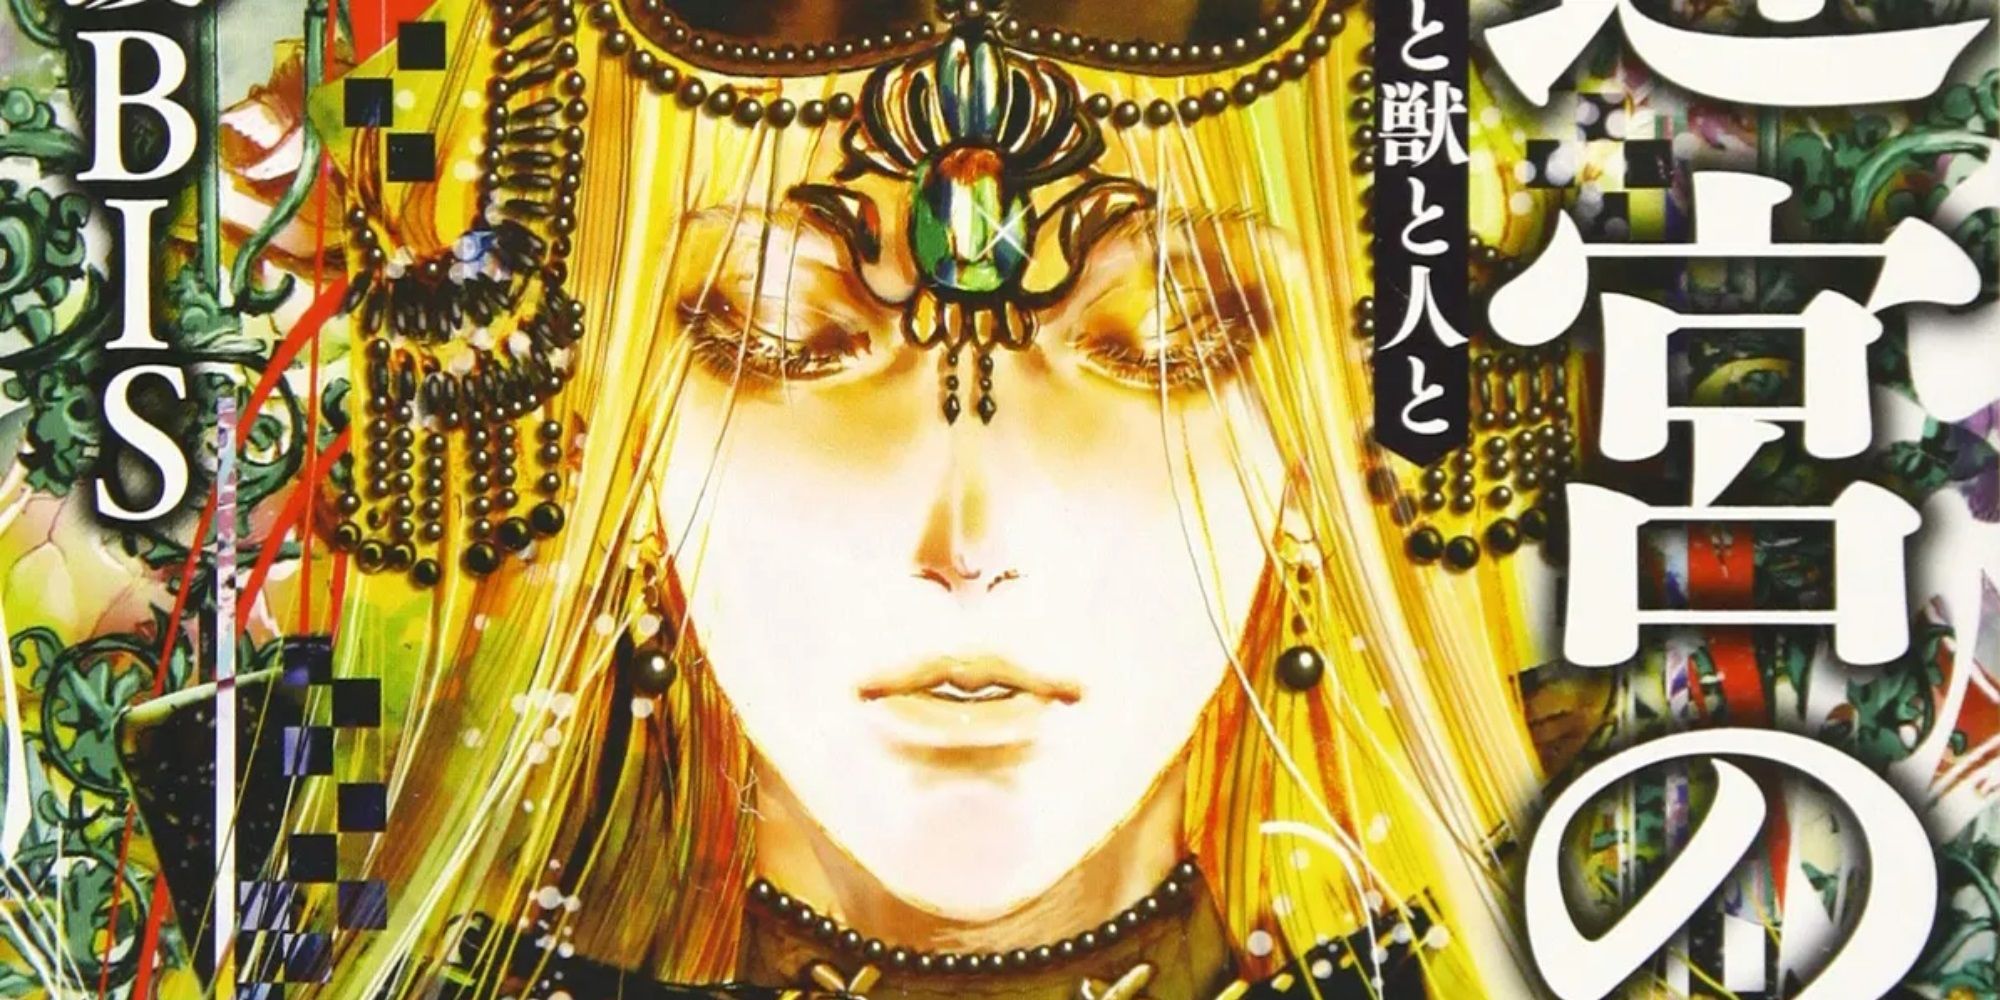 An image of a cover from King of the Labyrinth.